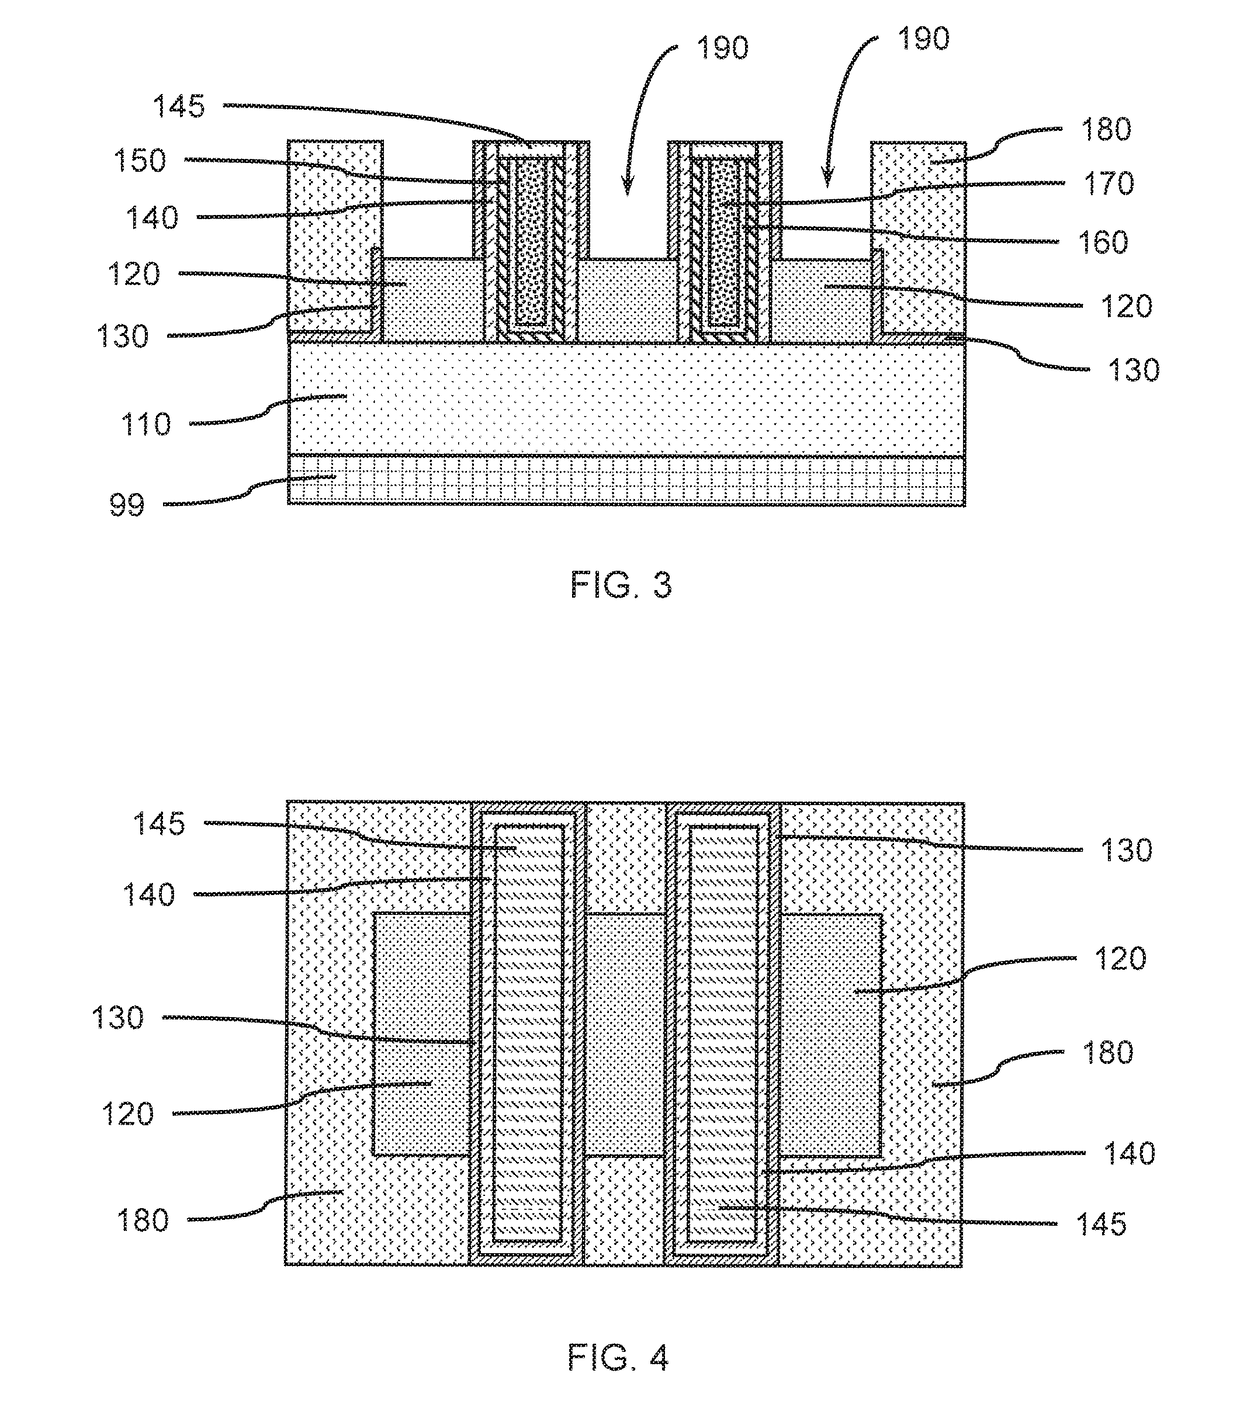 Fabrication of self-aligned gate contacts and source/drain contacts directly above gate electrodes and source/drains